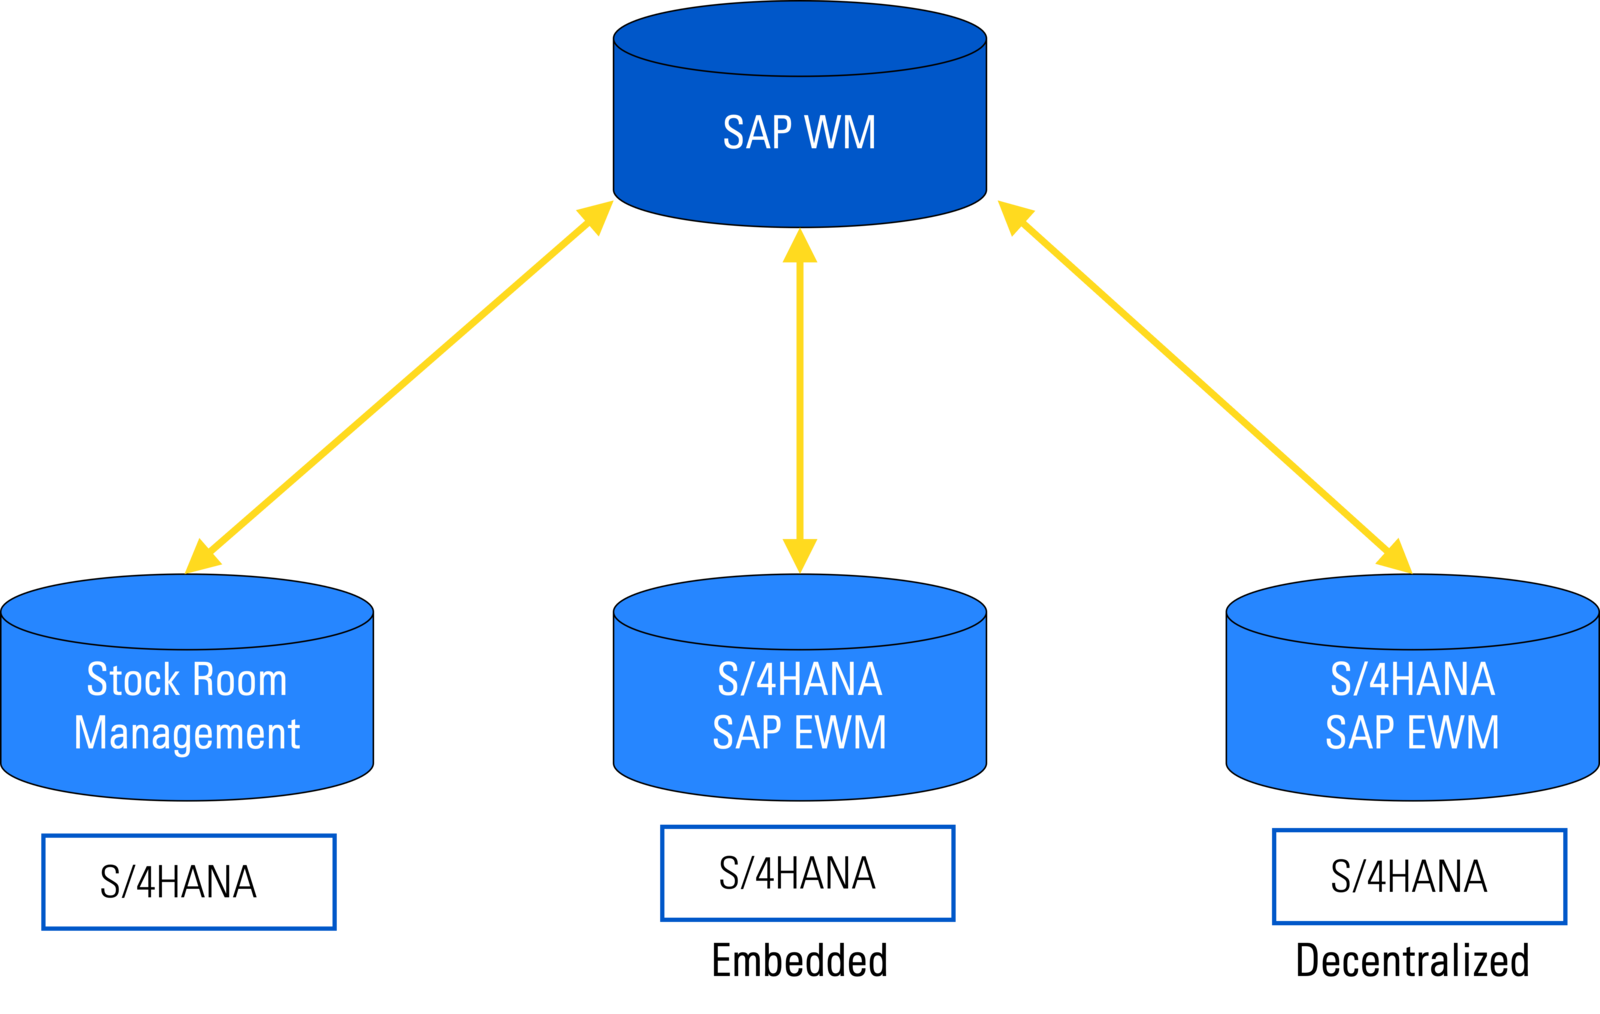 Stock Room Management: The WM Solution in S/4HANA